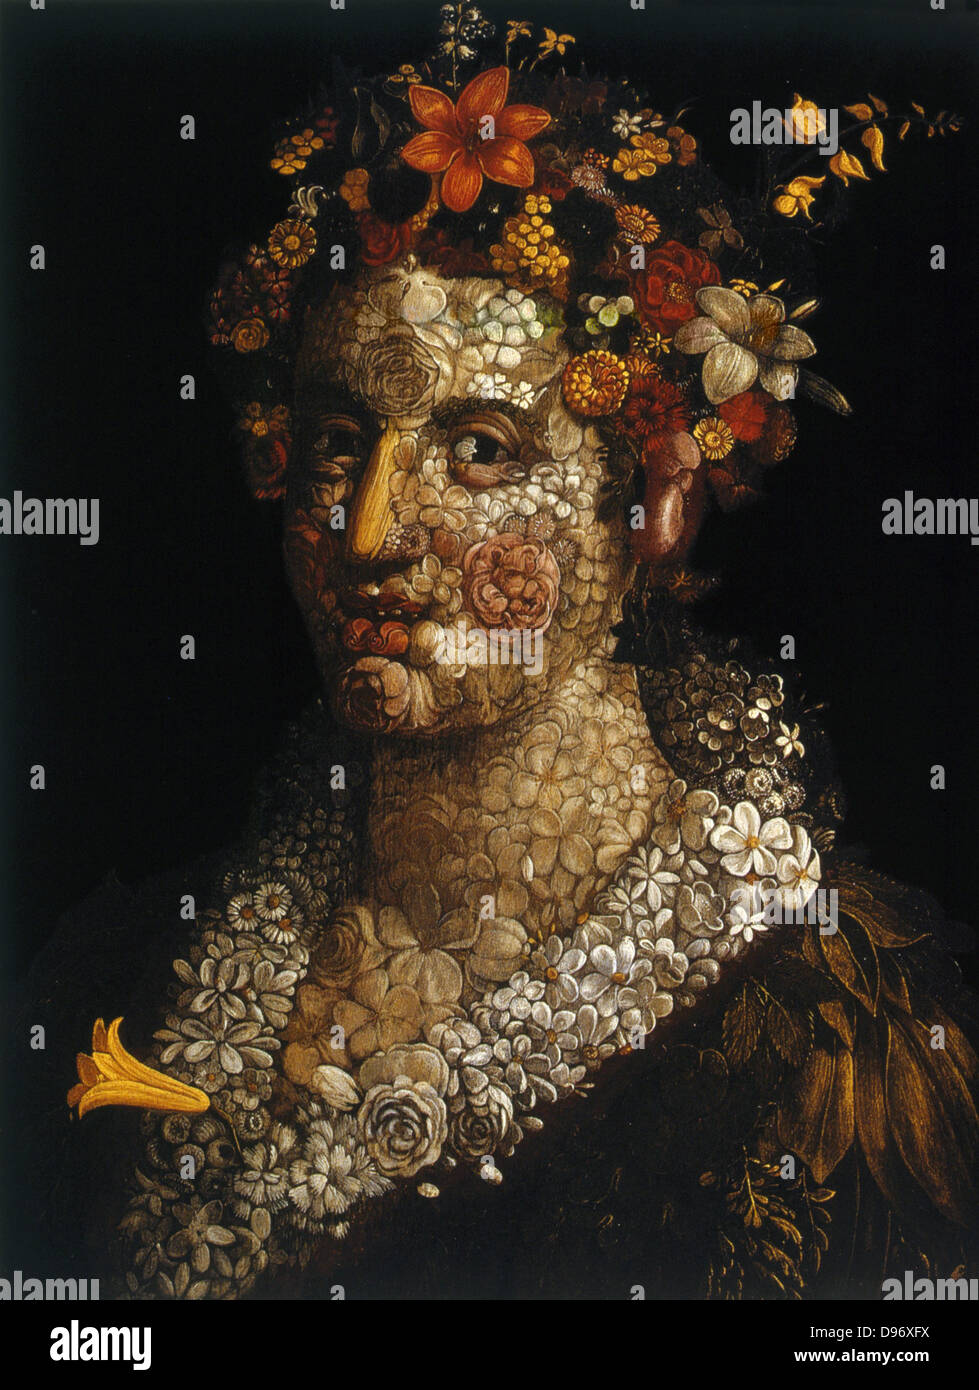 Flora', still life c1591. Flora's portrait is composed of a multitude of flowers and leaves. Oil on canvas. Guiseppe Arcimboldo (c1530-1593) Italian painter. Stock Photo